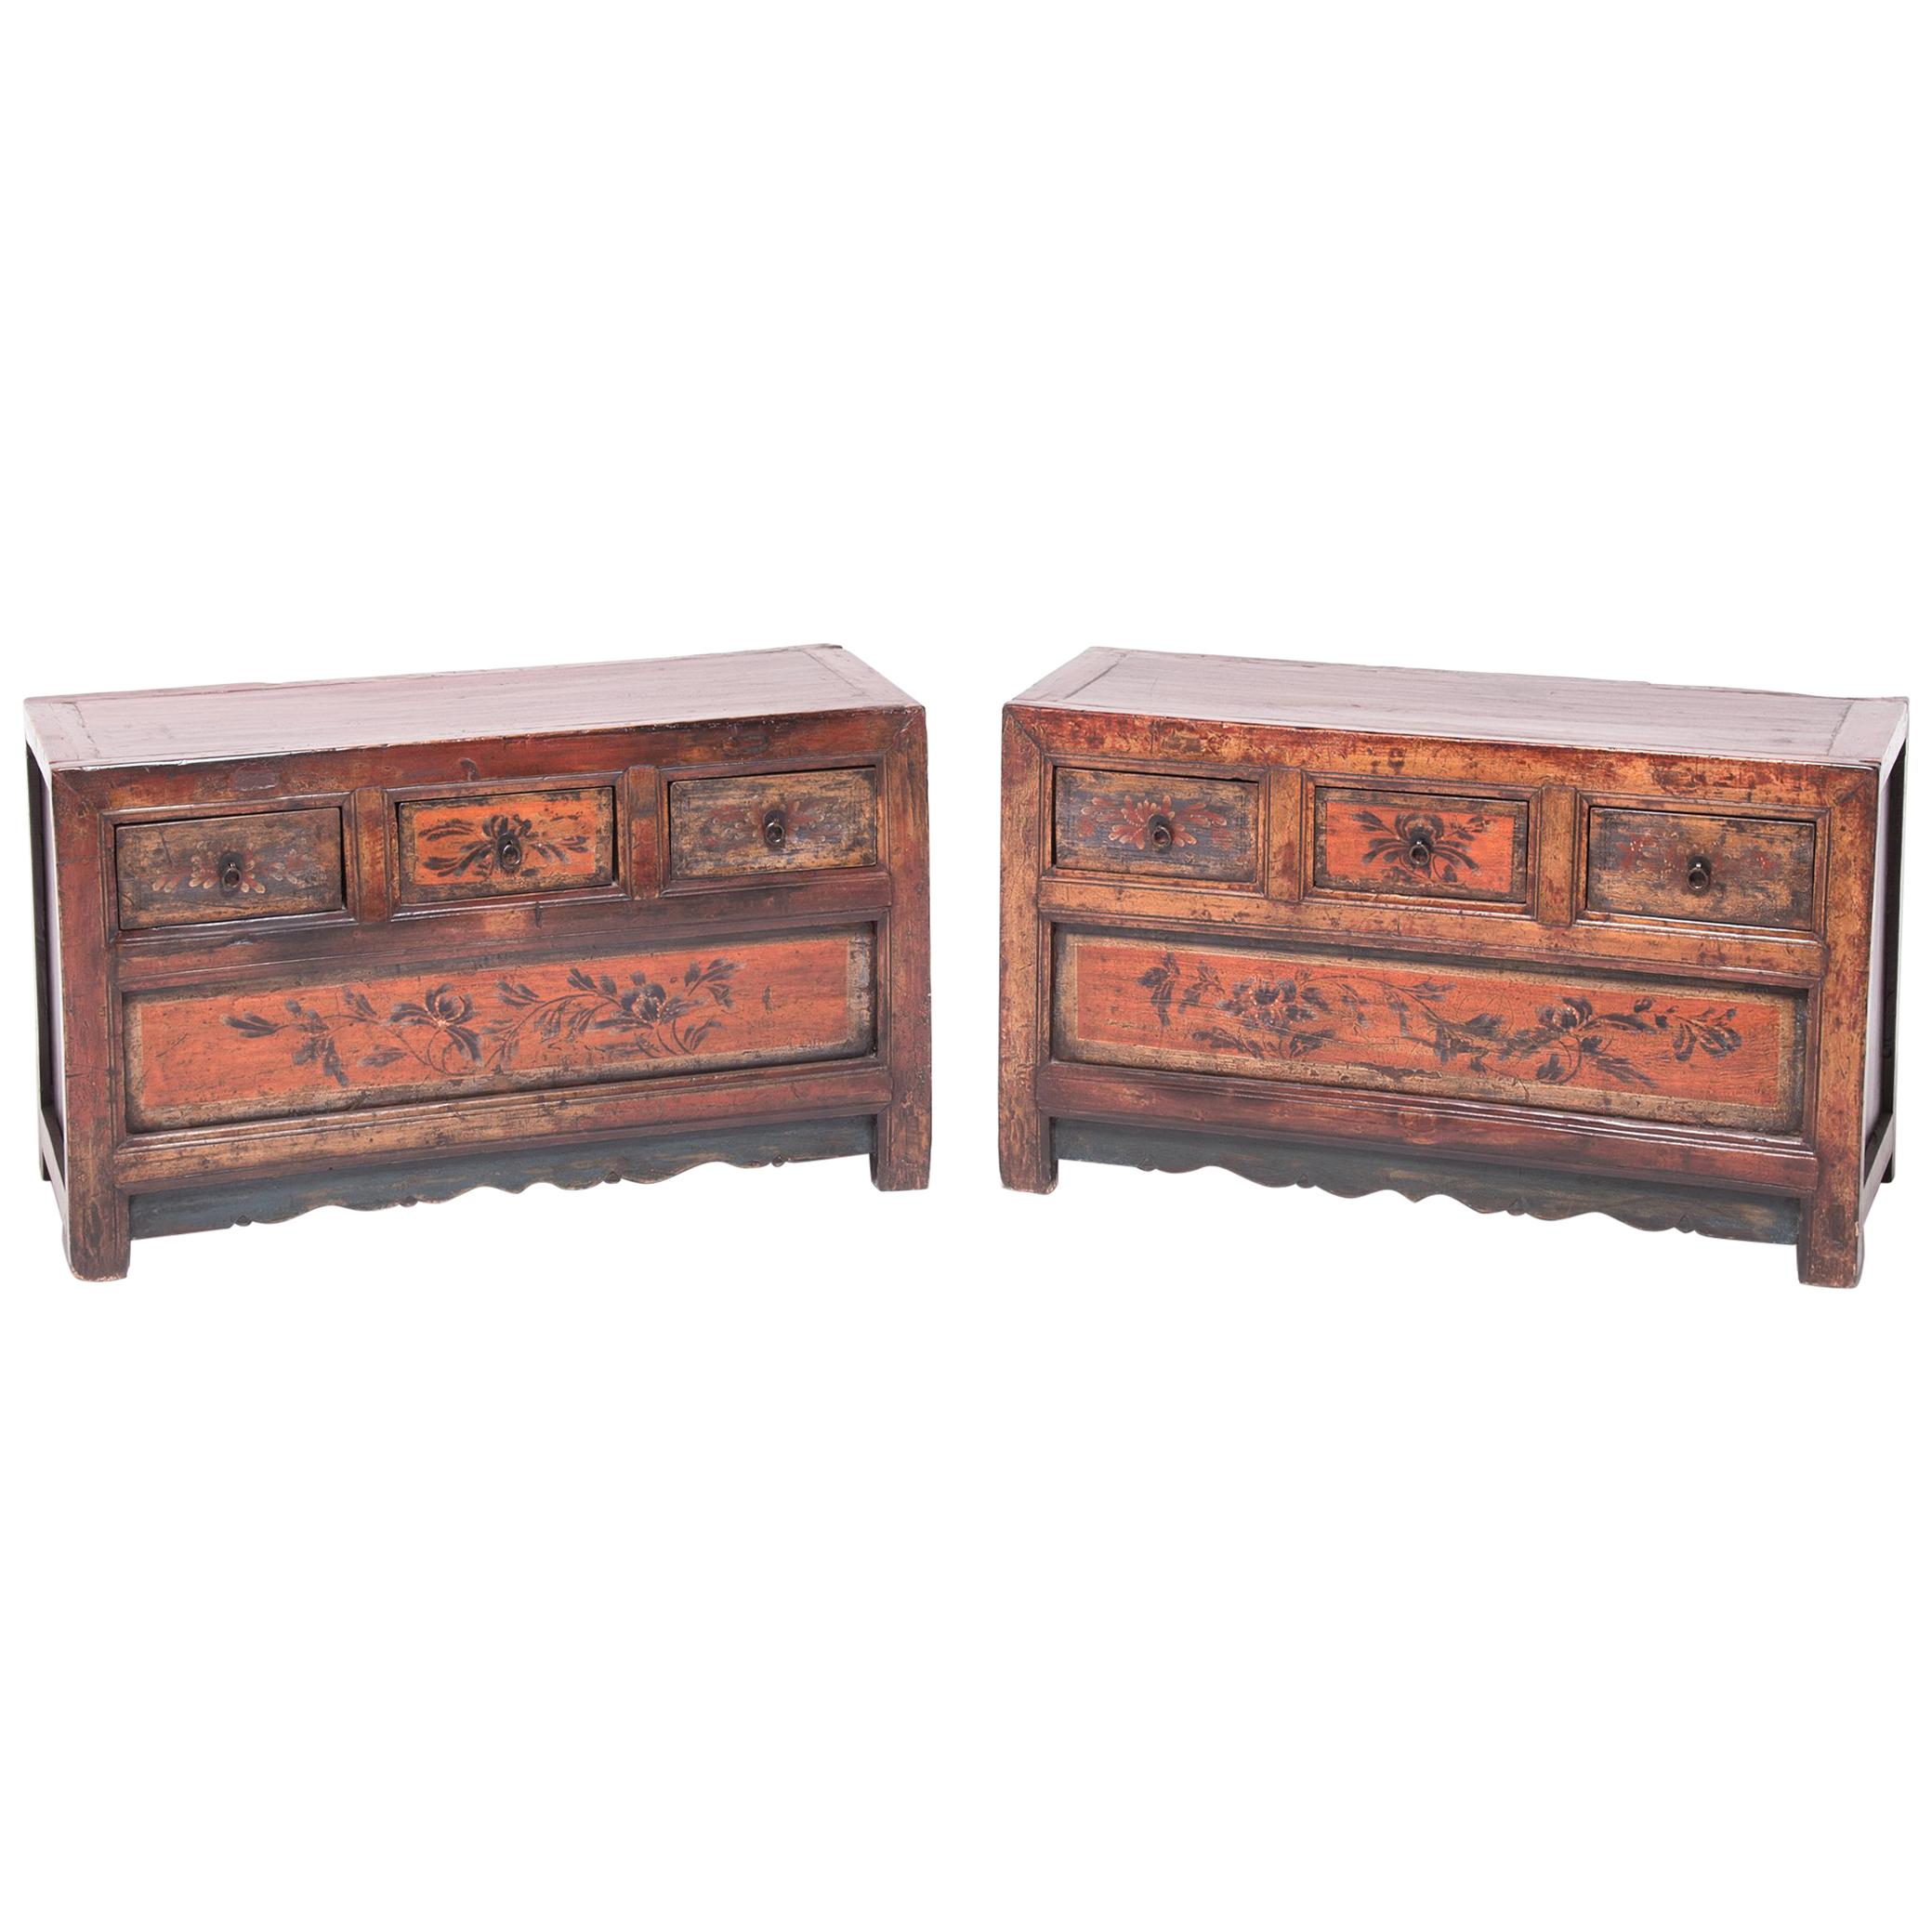 Pair of Mongolian Low Painted Chests